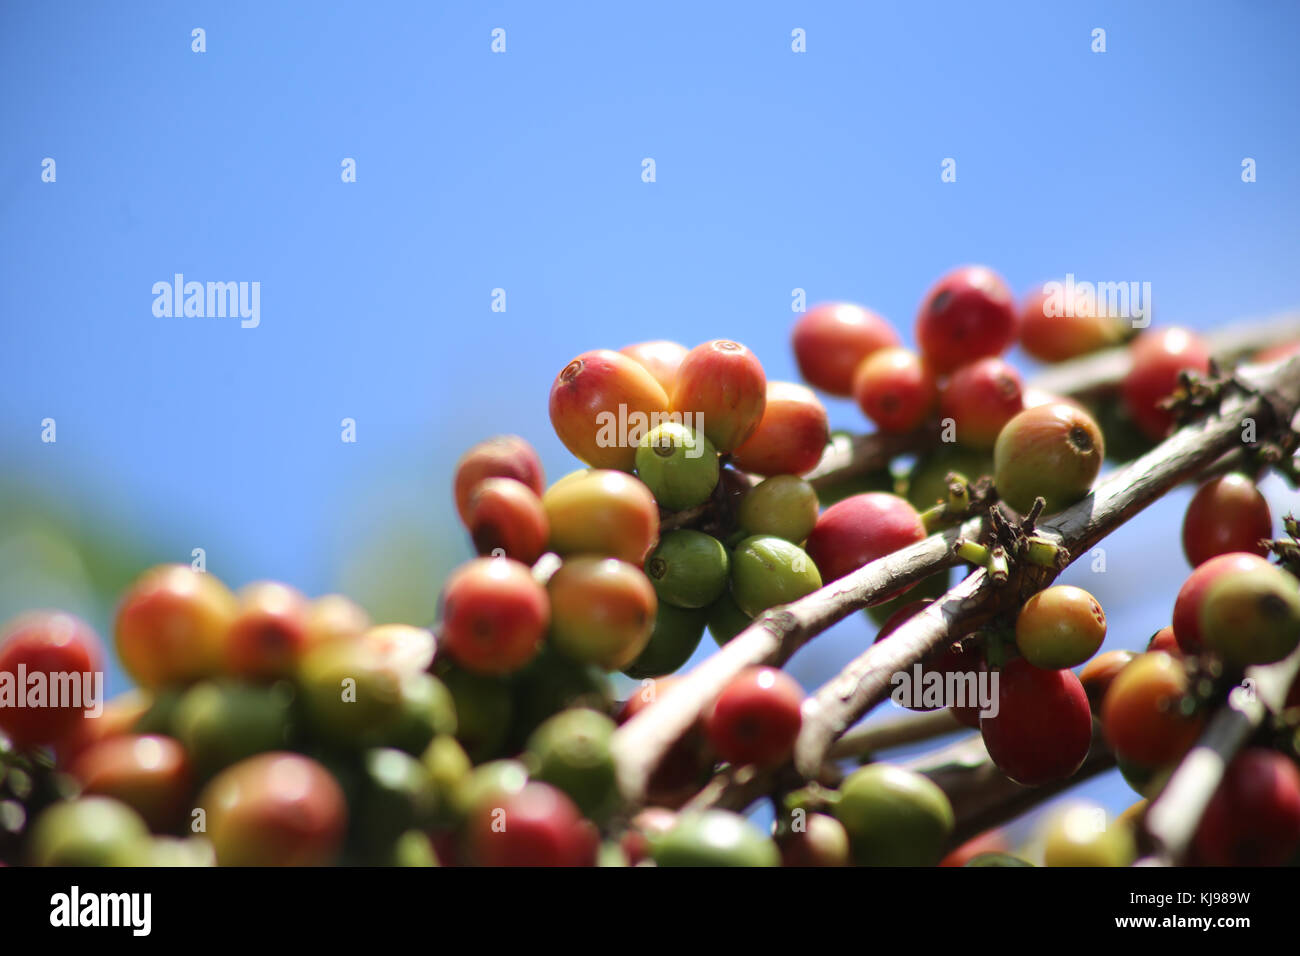 Kenya. 22nd Nov, 2017. Ripe coffee berries at a farm in in Gichatha-ini village in Nyeri County, 125 Kilometers North of Kenya's capital Nairobi. Harvesting season is at its peak and farmers are already picking ripe berries, which they deliver to the local factory. Coffee is the main source of income for most farmers earning an average 0.8 USD per kilogram of cherry. The farmers grow Arabica coffee, whose beans are widely sought in the world market among them consumers in Europe and USA. Picture taken on November 22, 2017, two days after the Supreme Court of Kenya upheld President Uhuru Stock Photo